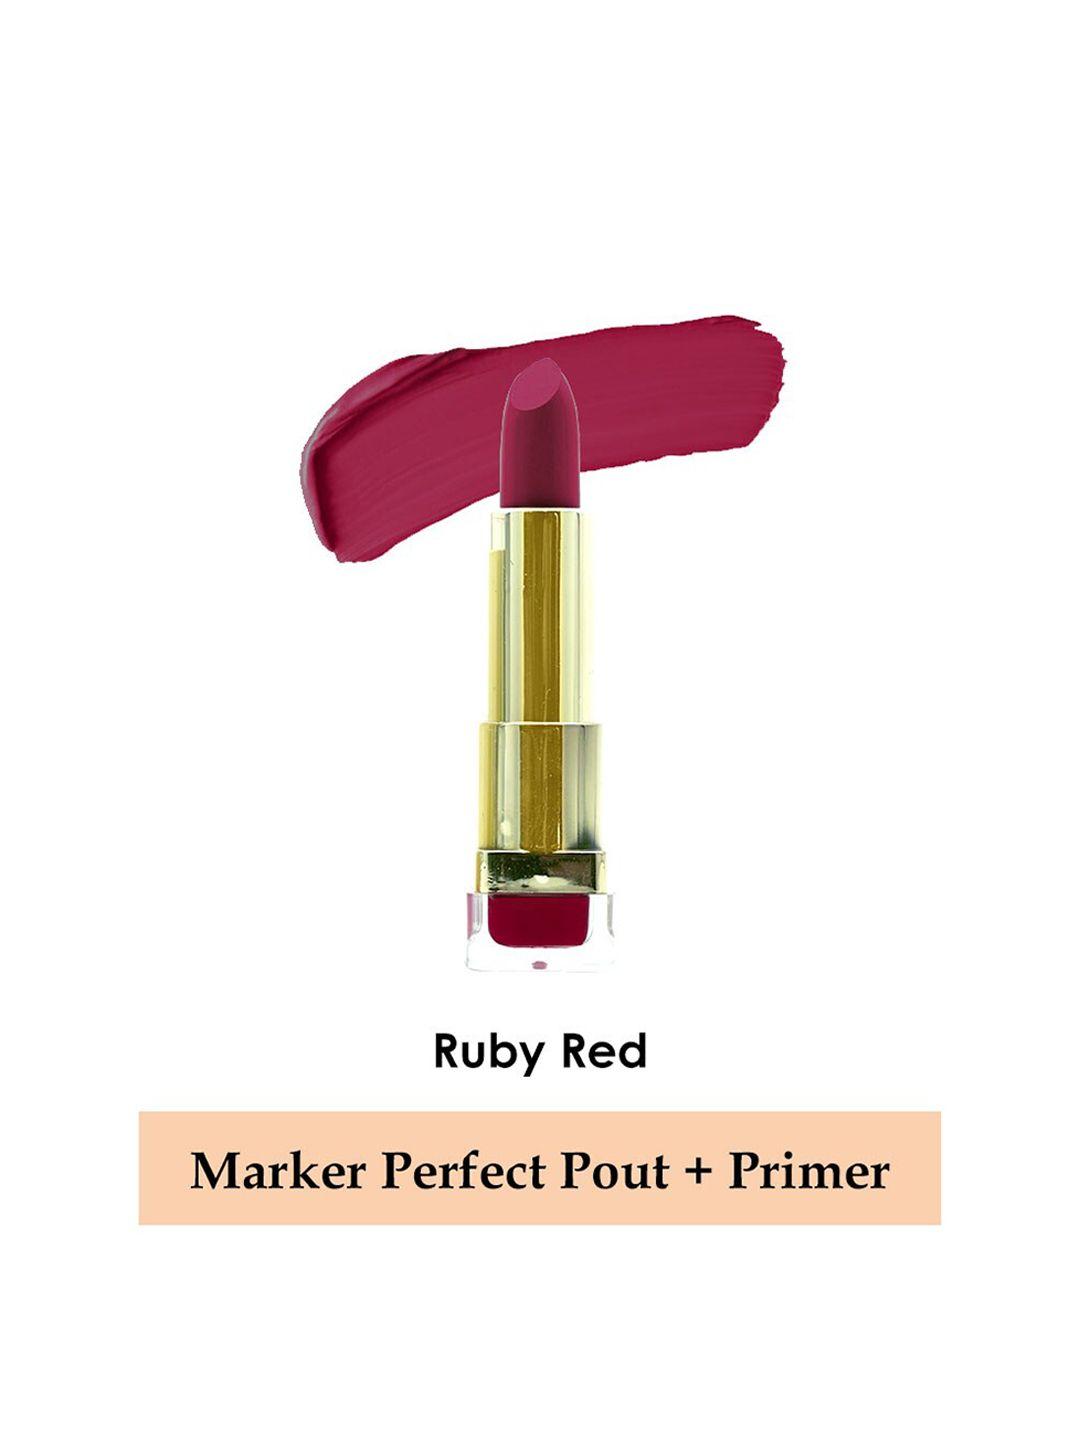 beautyrelay london long-lasting perfect pout + primer lipstick 3.5 g - ruby red